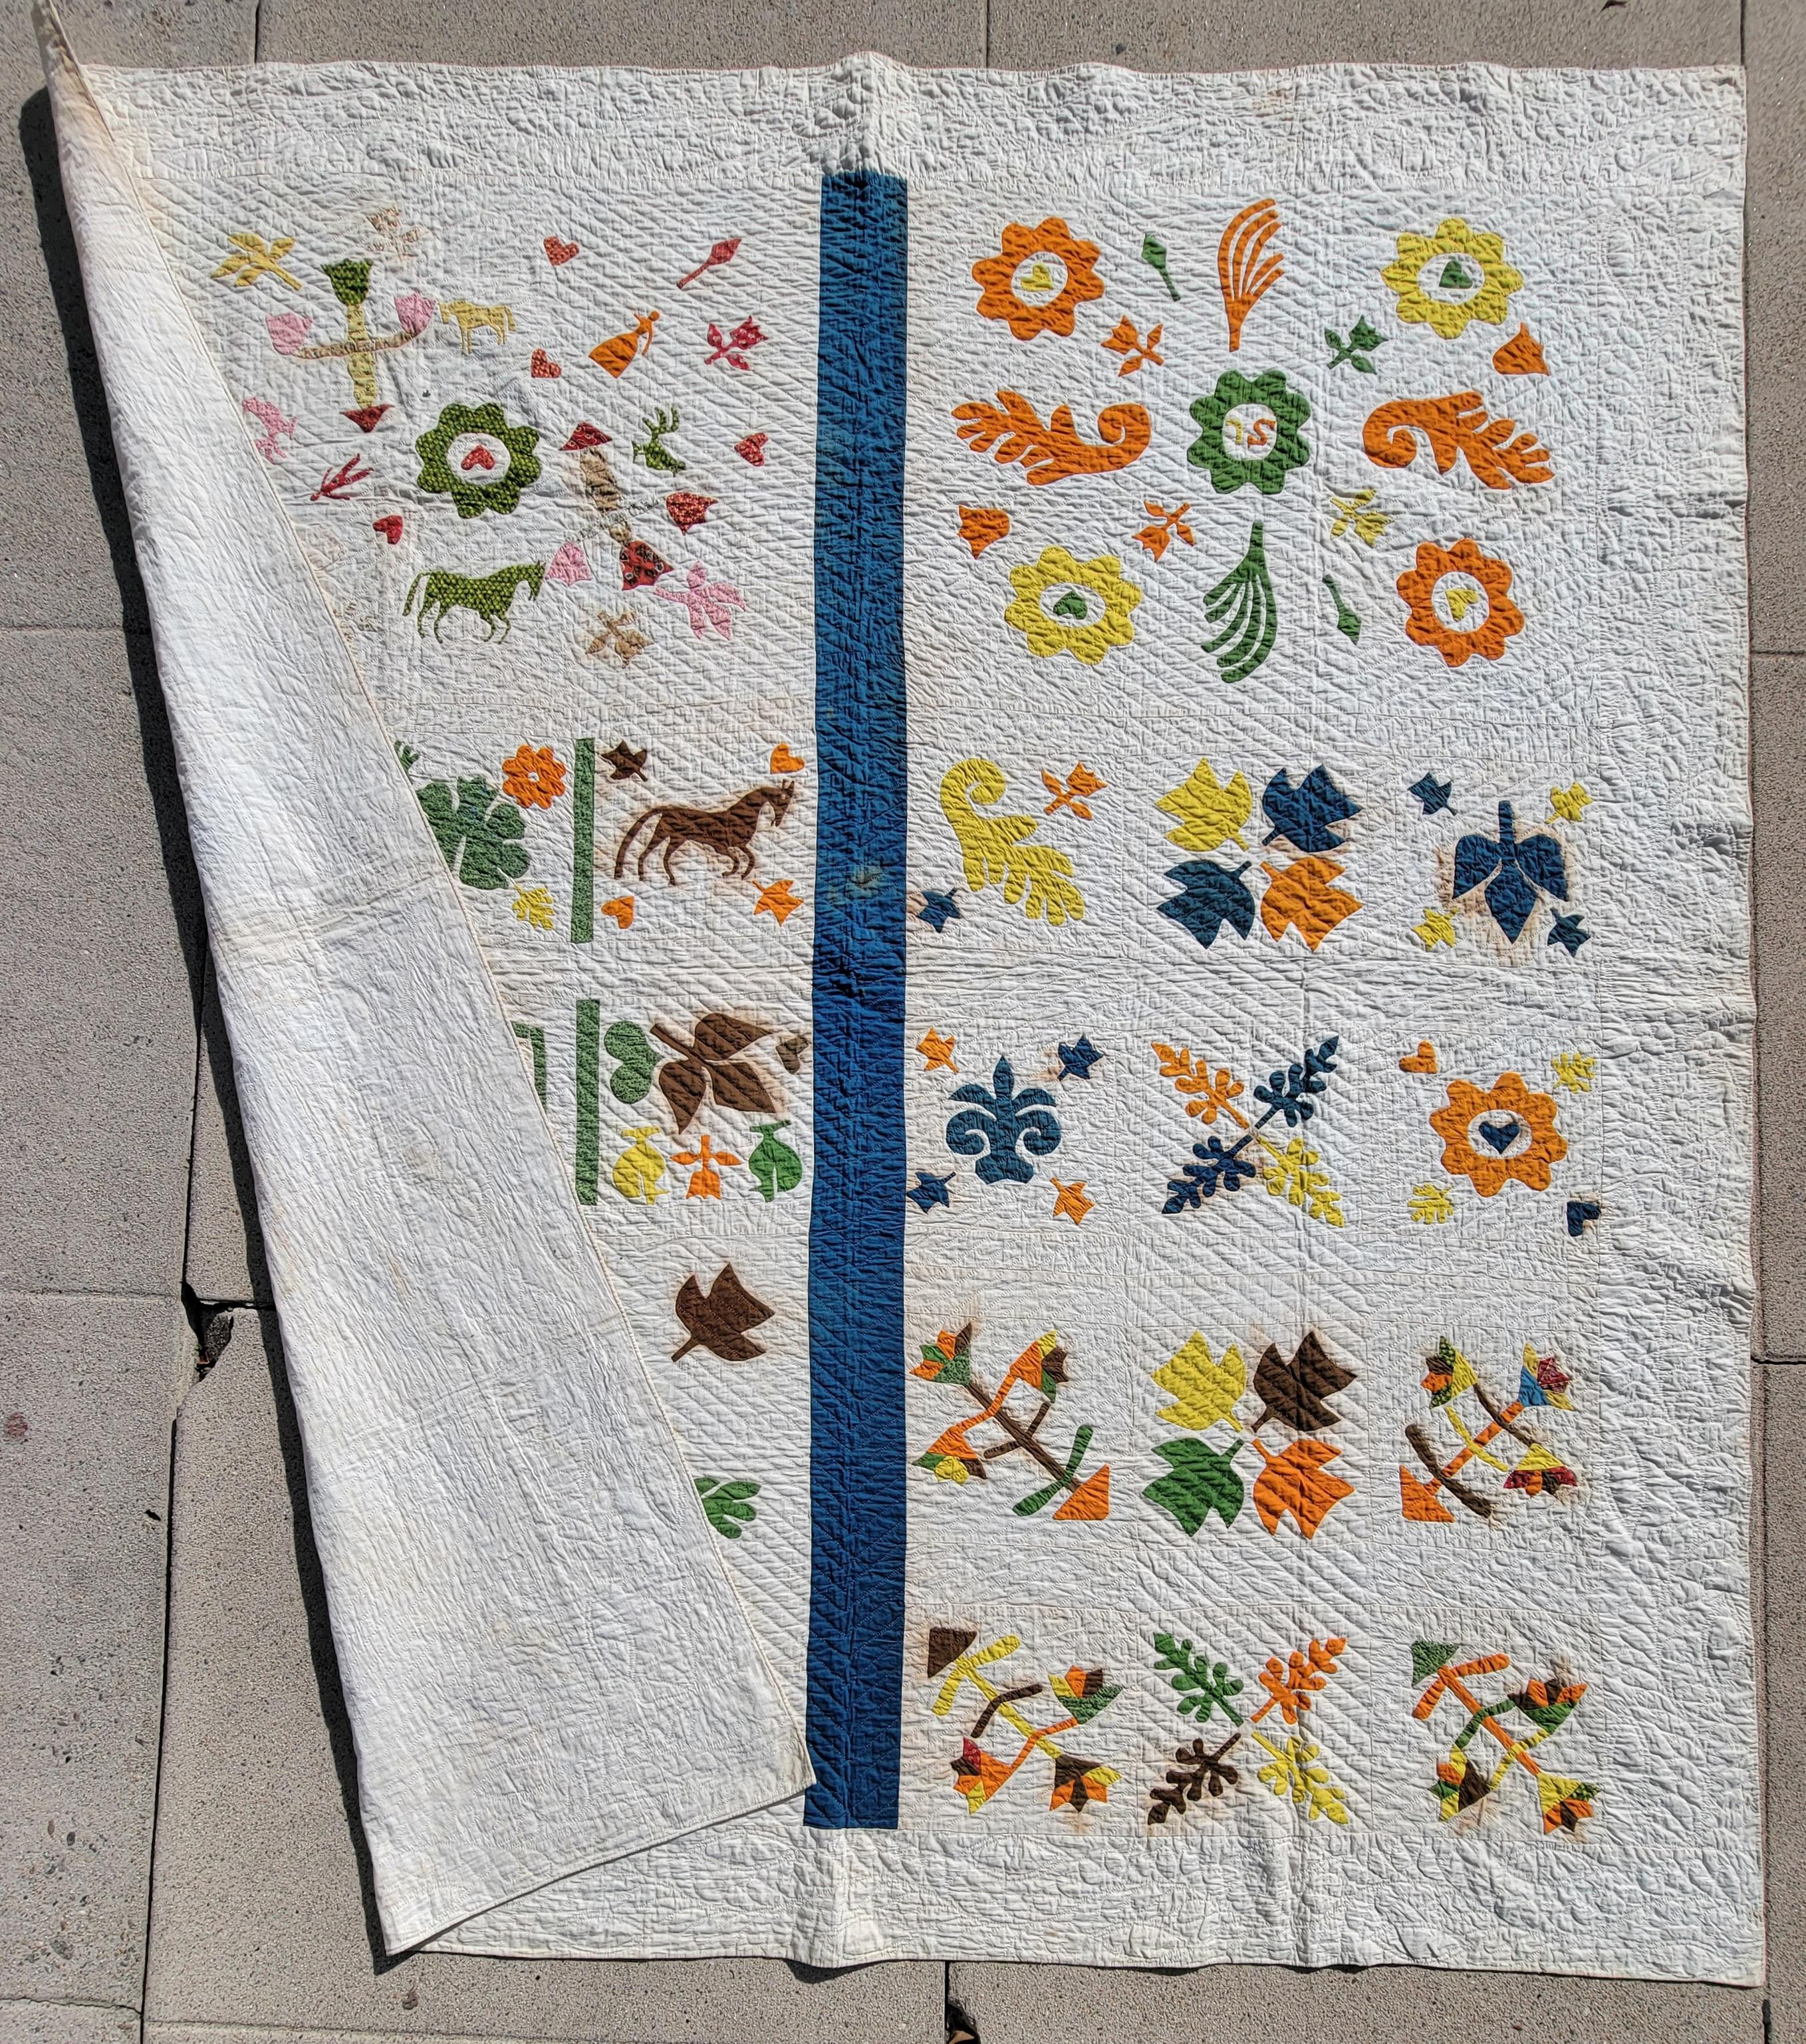 This amazing 19thc hand applique and hand quilted Afro-American pictorial quilt is in fine condition. It is most unusual the pictorial appliqued birds,people and other animals resembles many of the published Afro-American quilts in many quilt books.